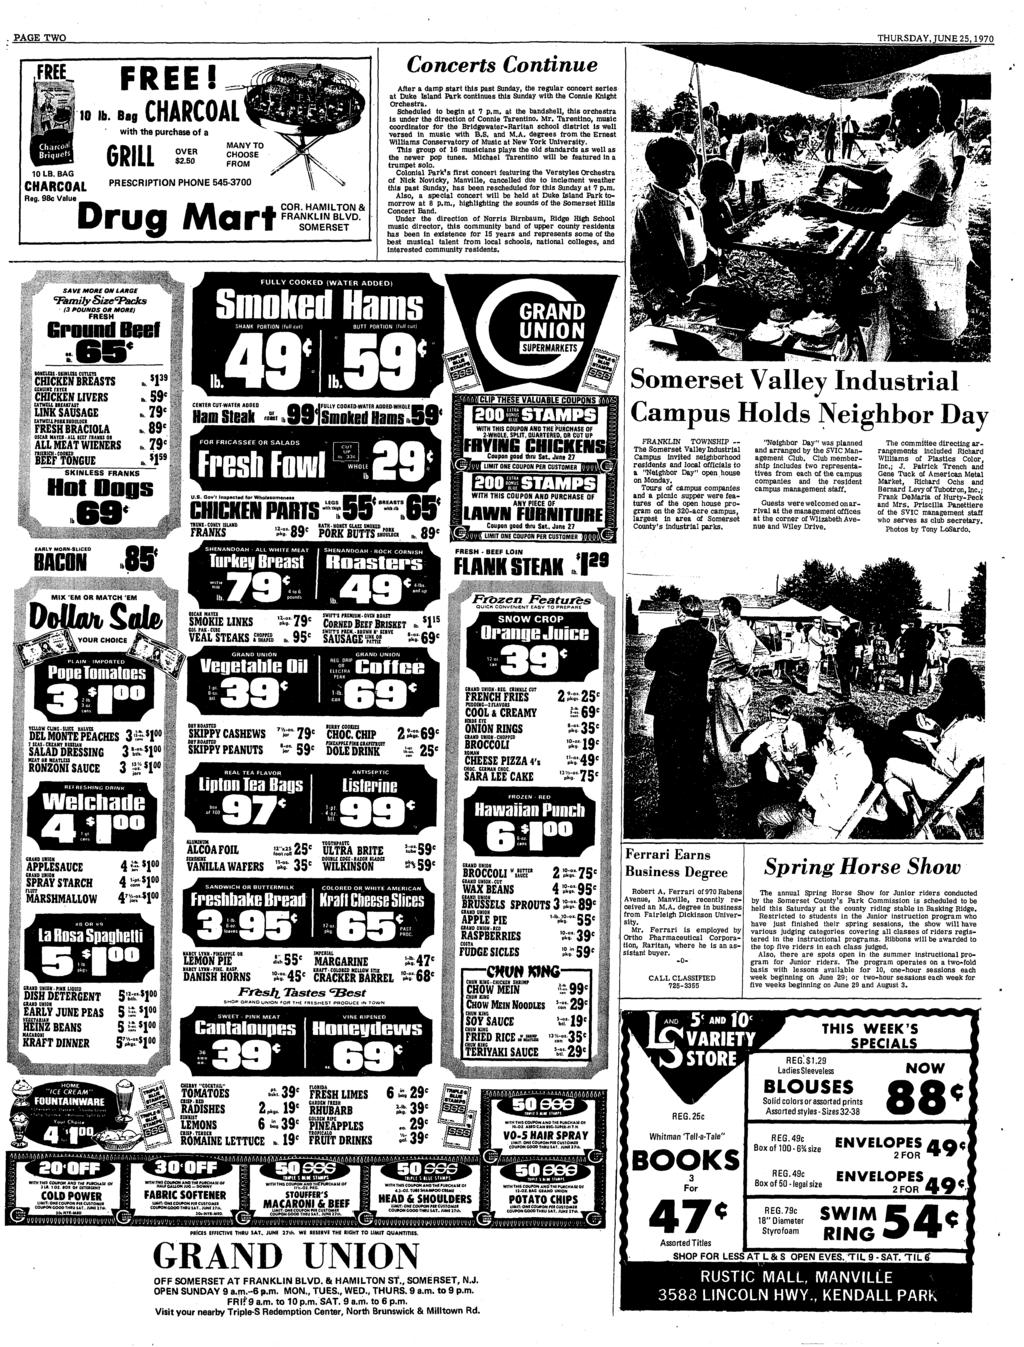 . PAGE TWO THURSDAY,JUNE 25, 1970 10 LB. BAG CHARCOAL Reg. 98c Value FREE!,,o,..,,, CHARCOAL wth the purchase of a GRLL $2.50 PRESCRPTON PHONE 545-3700 Drug ml MANY TO CHOOSE FROM Mart COR.